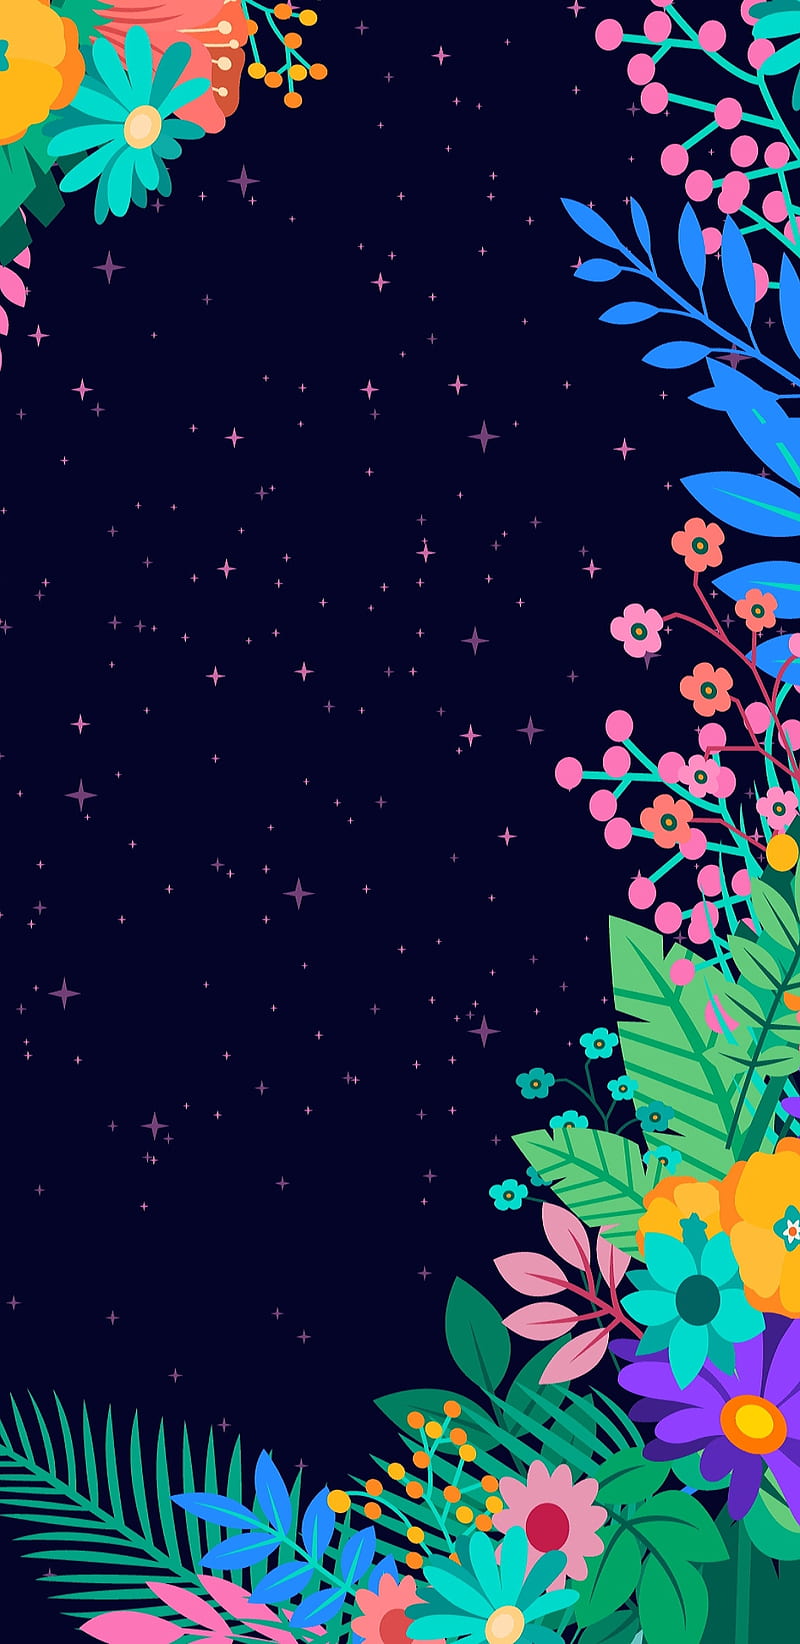 1920x1080px, 1080P free download | Nightly Gardens, colourful, floral ...